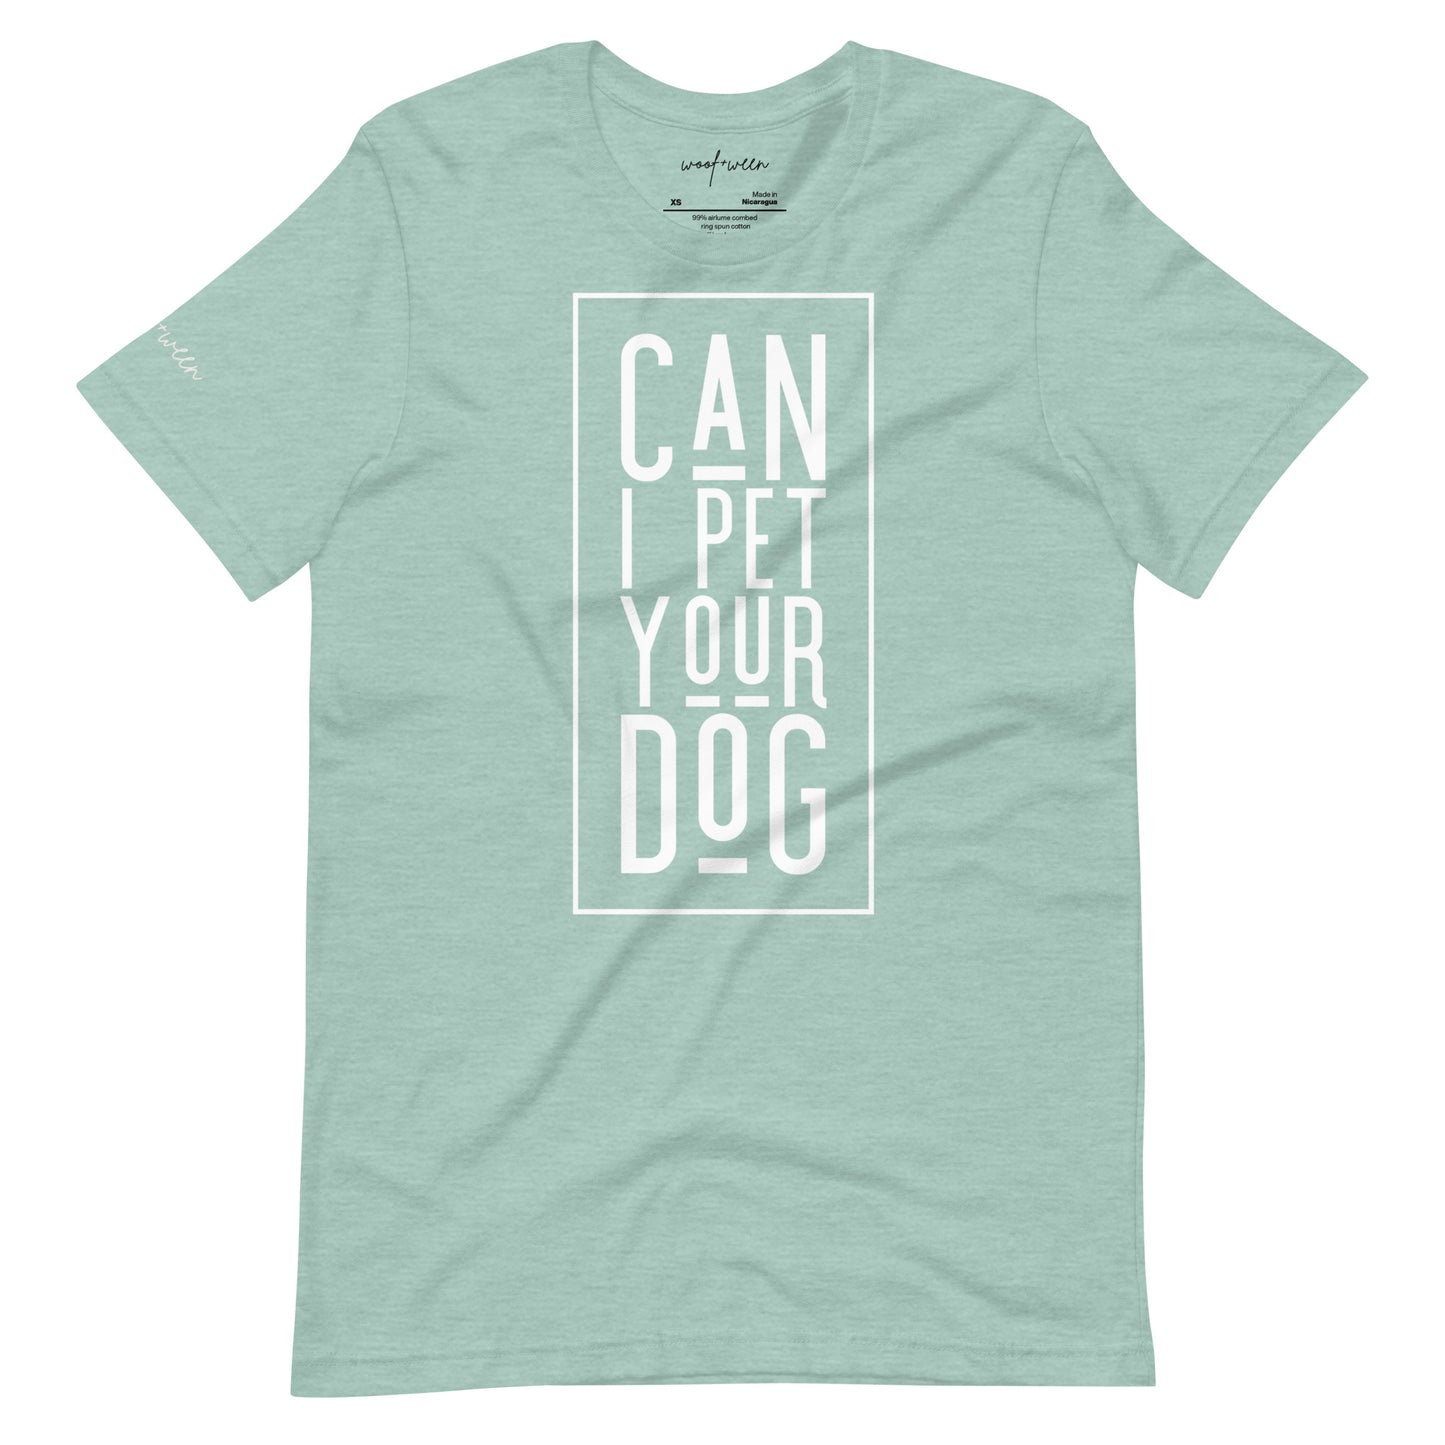 TEE - can i pet your dog